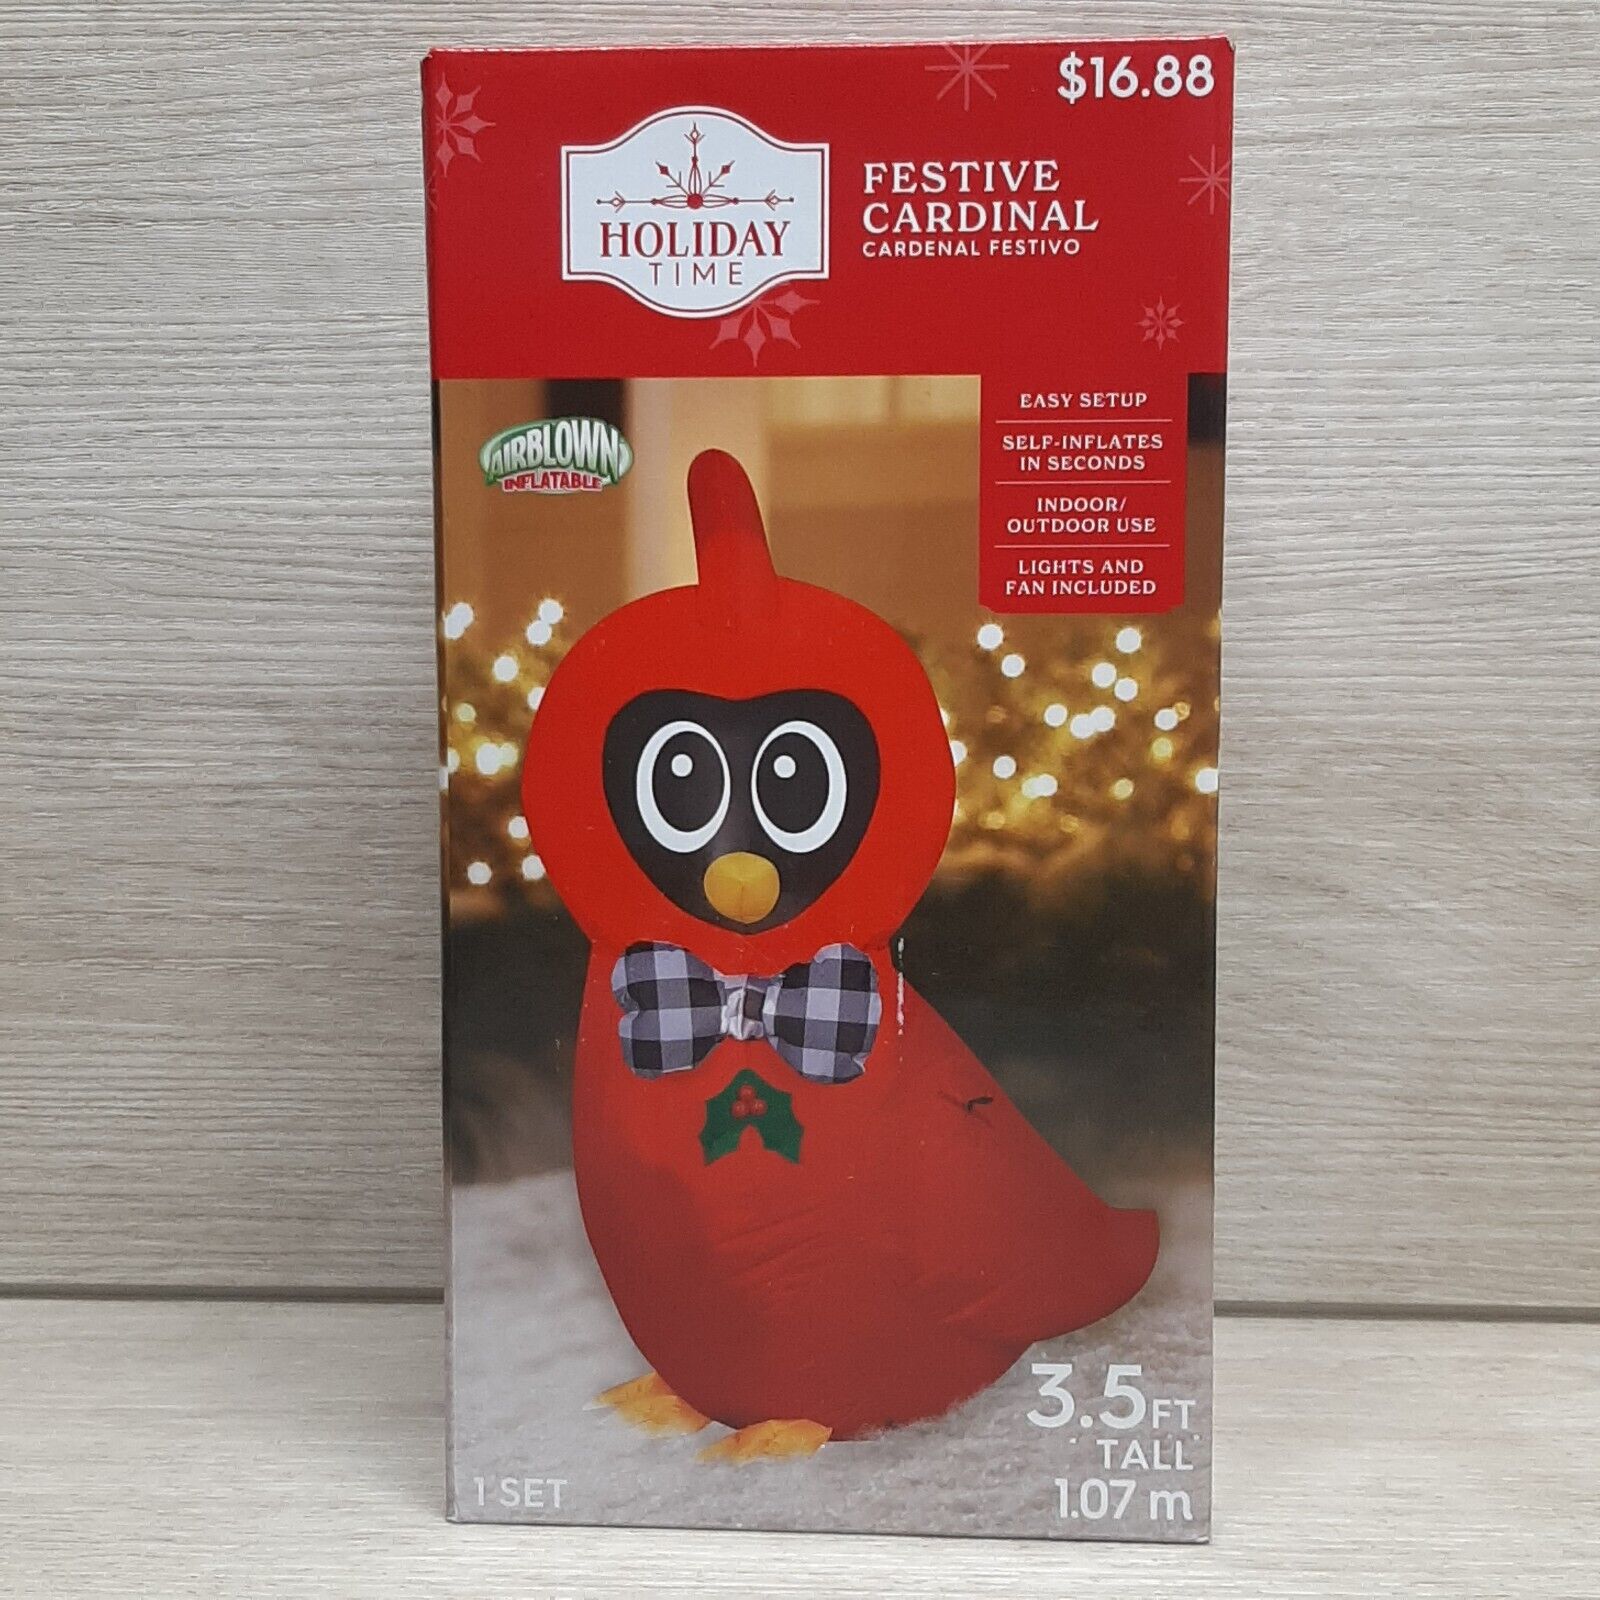 Holiday Time Festive Winter Cardinal 3.5 ft Christmas Airblown Inflatable New